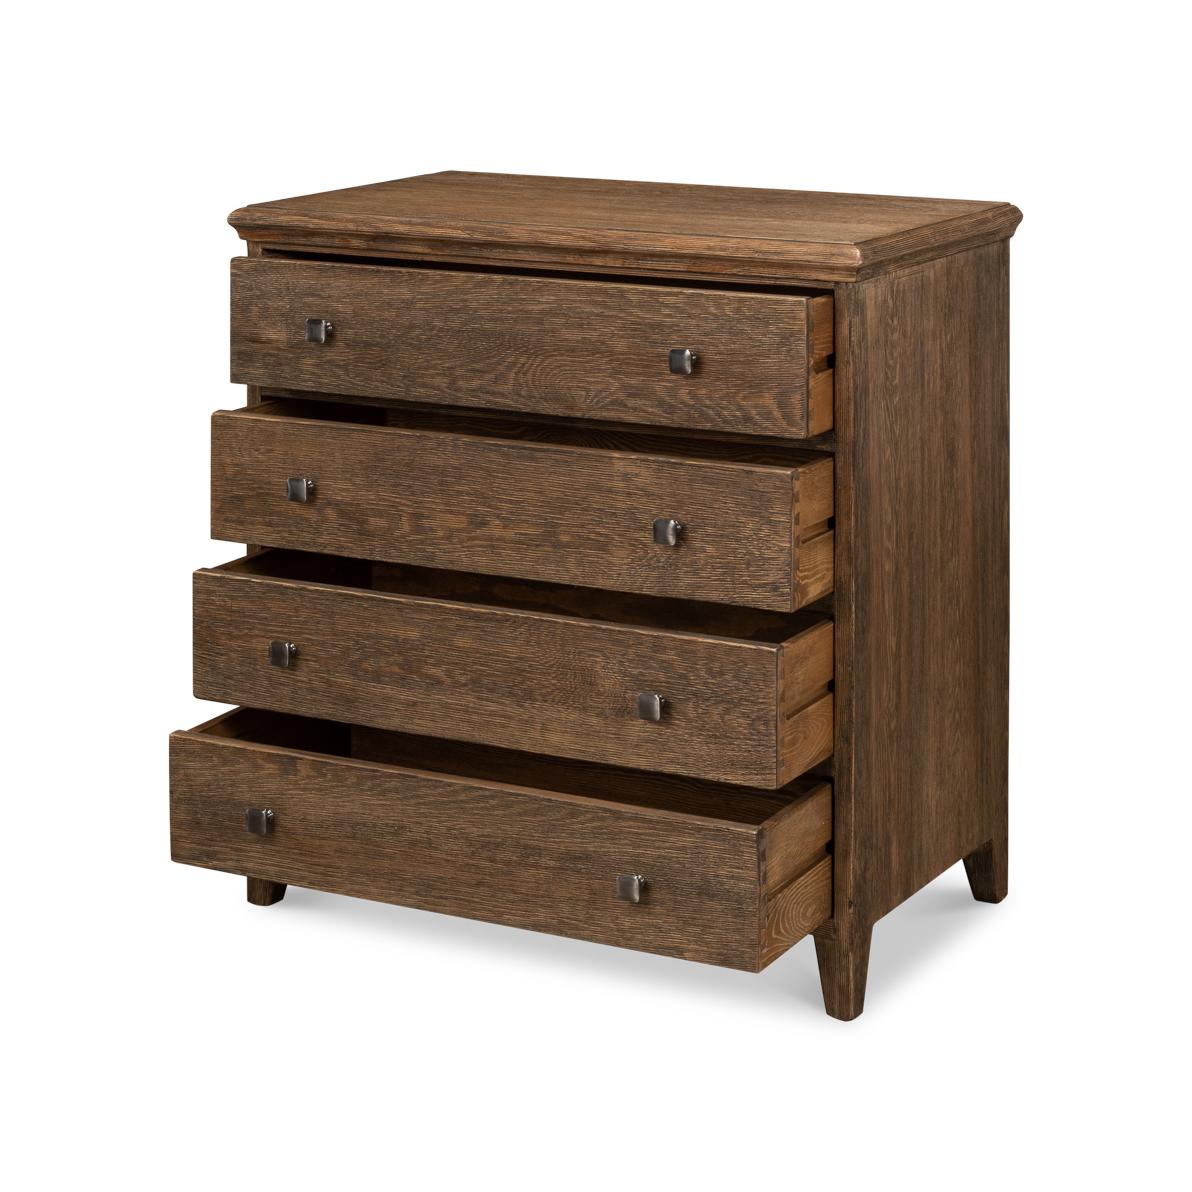 Rustic Classic Four Drawer Chest For Sale